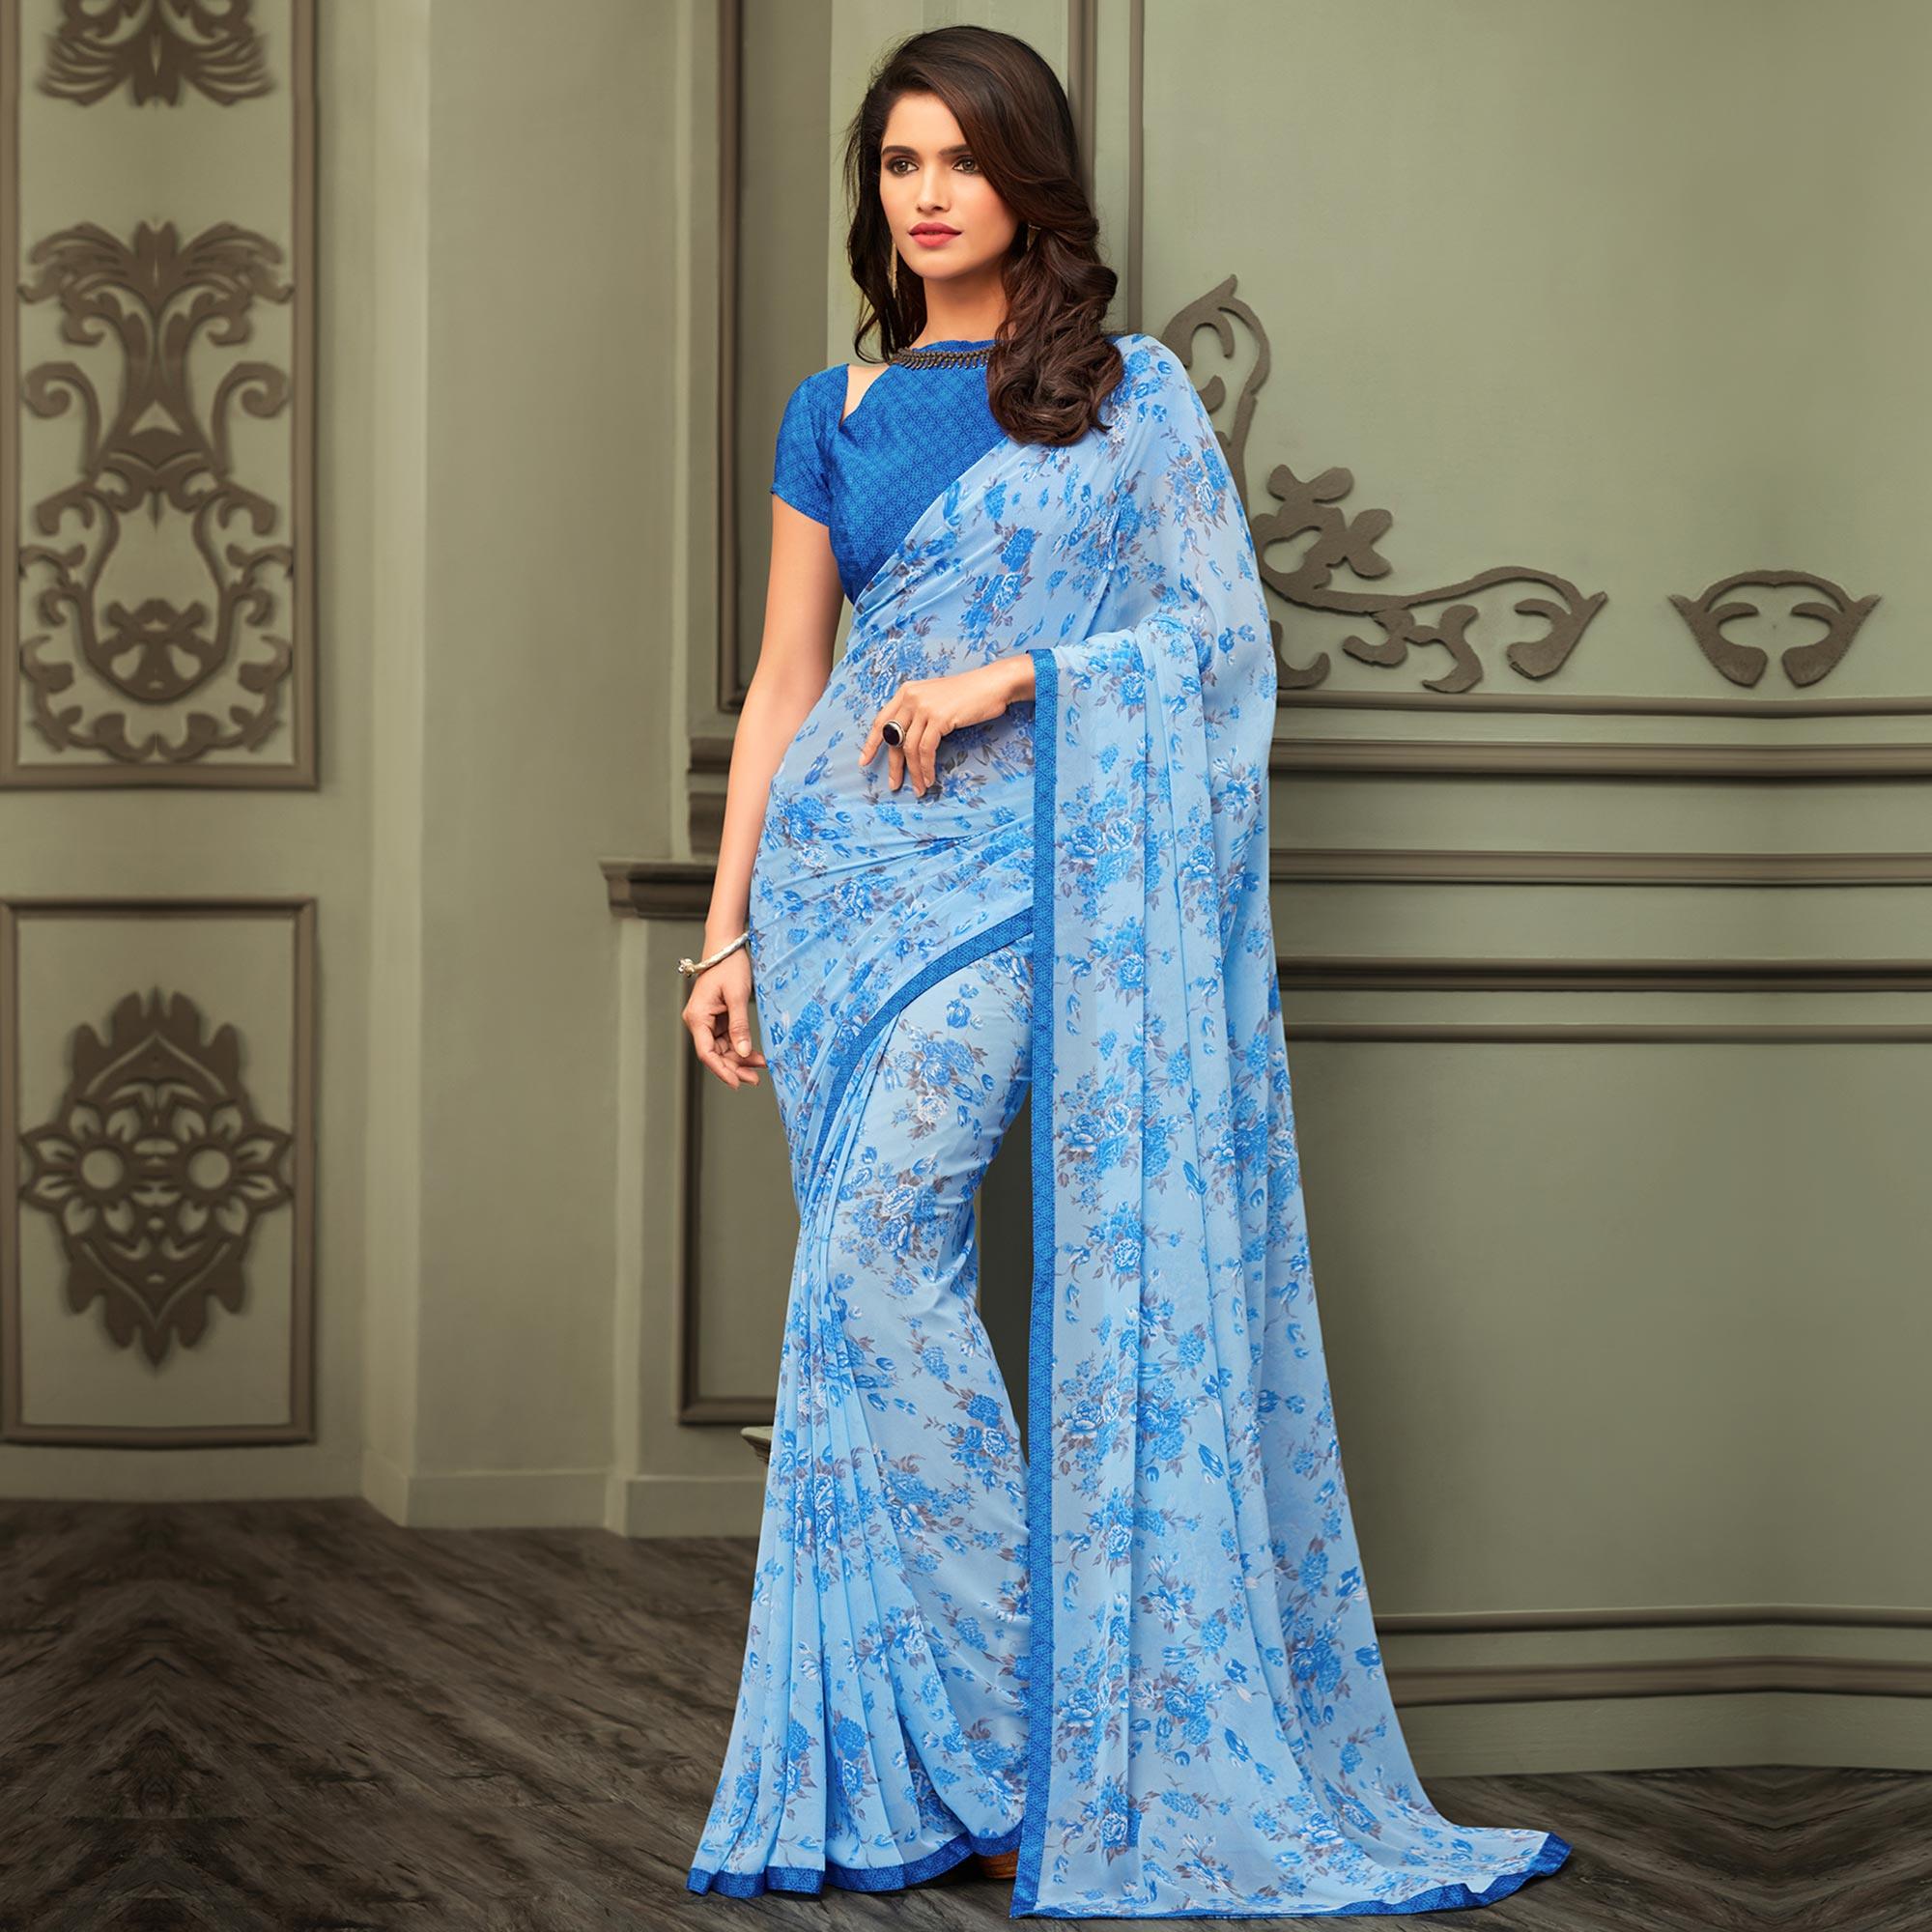 Captivating Light Blue Colored Casual Floral Printed Georgette Saree - Peachmode